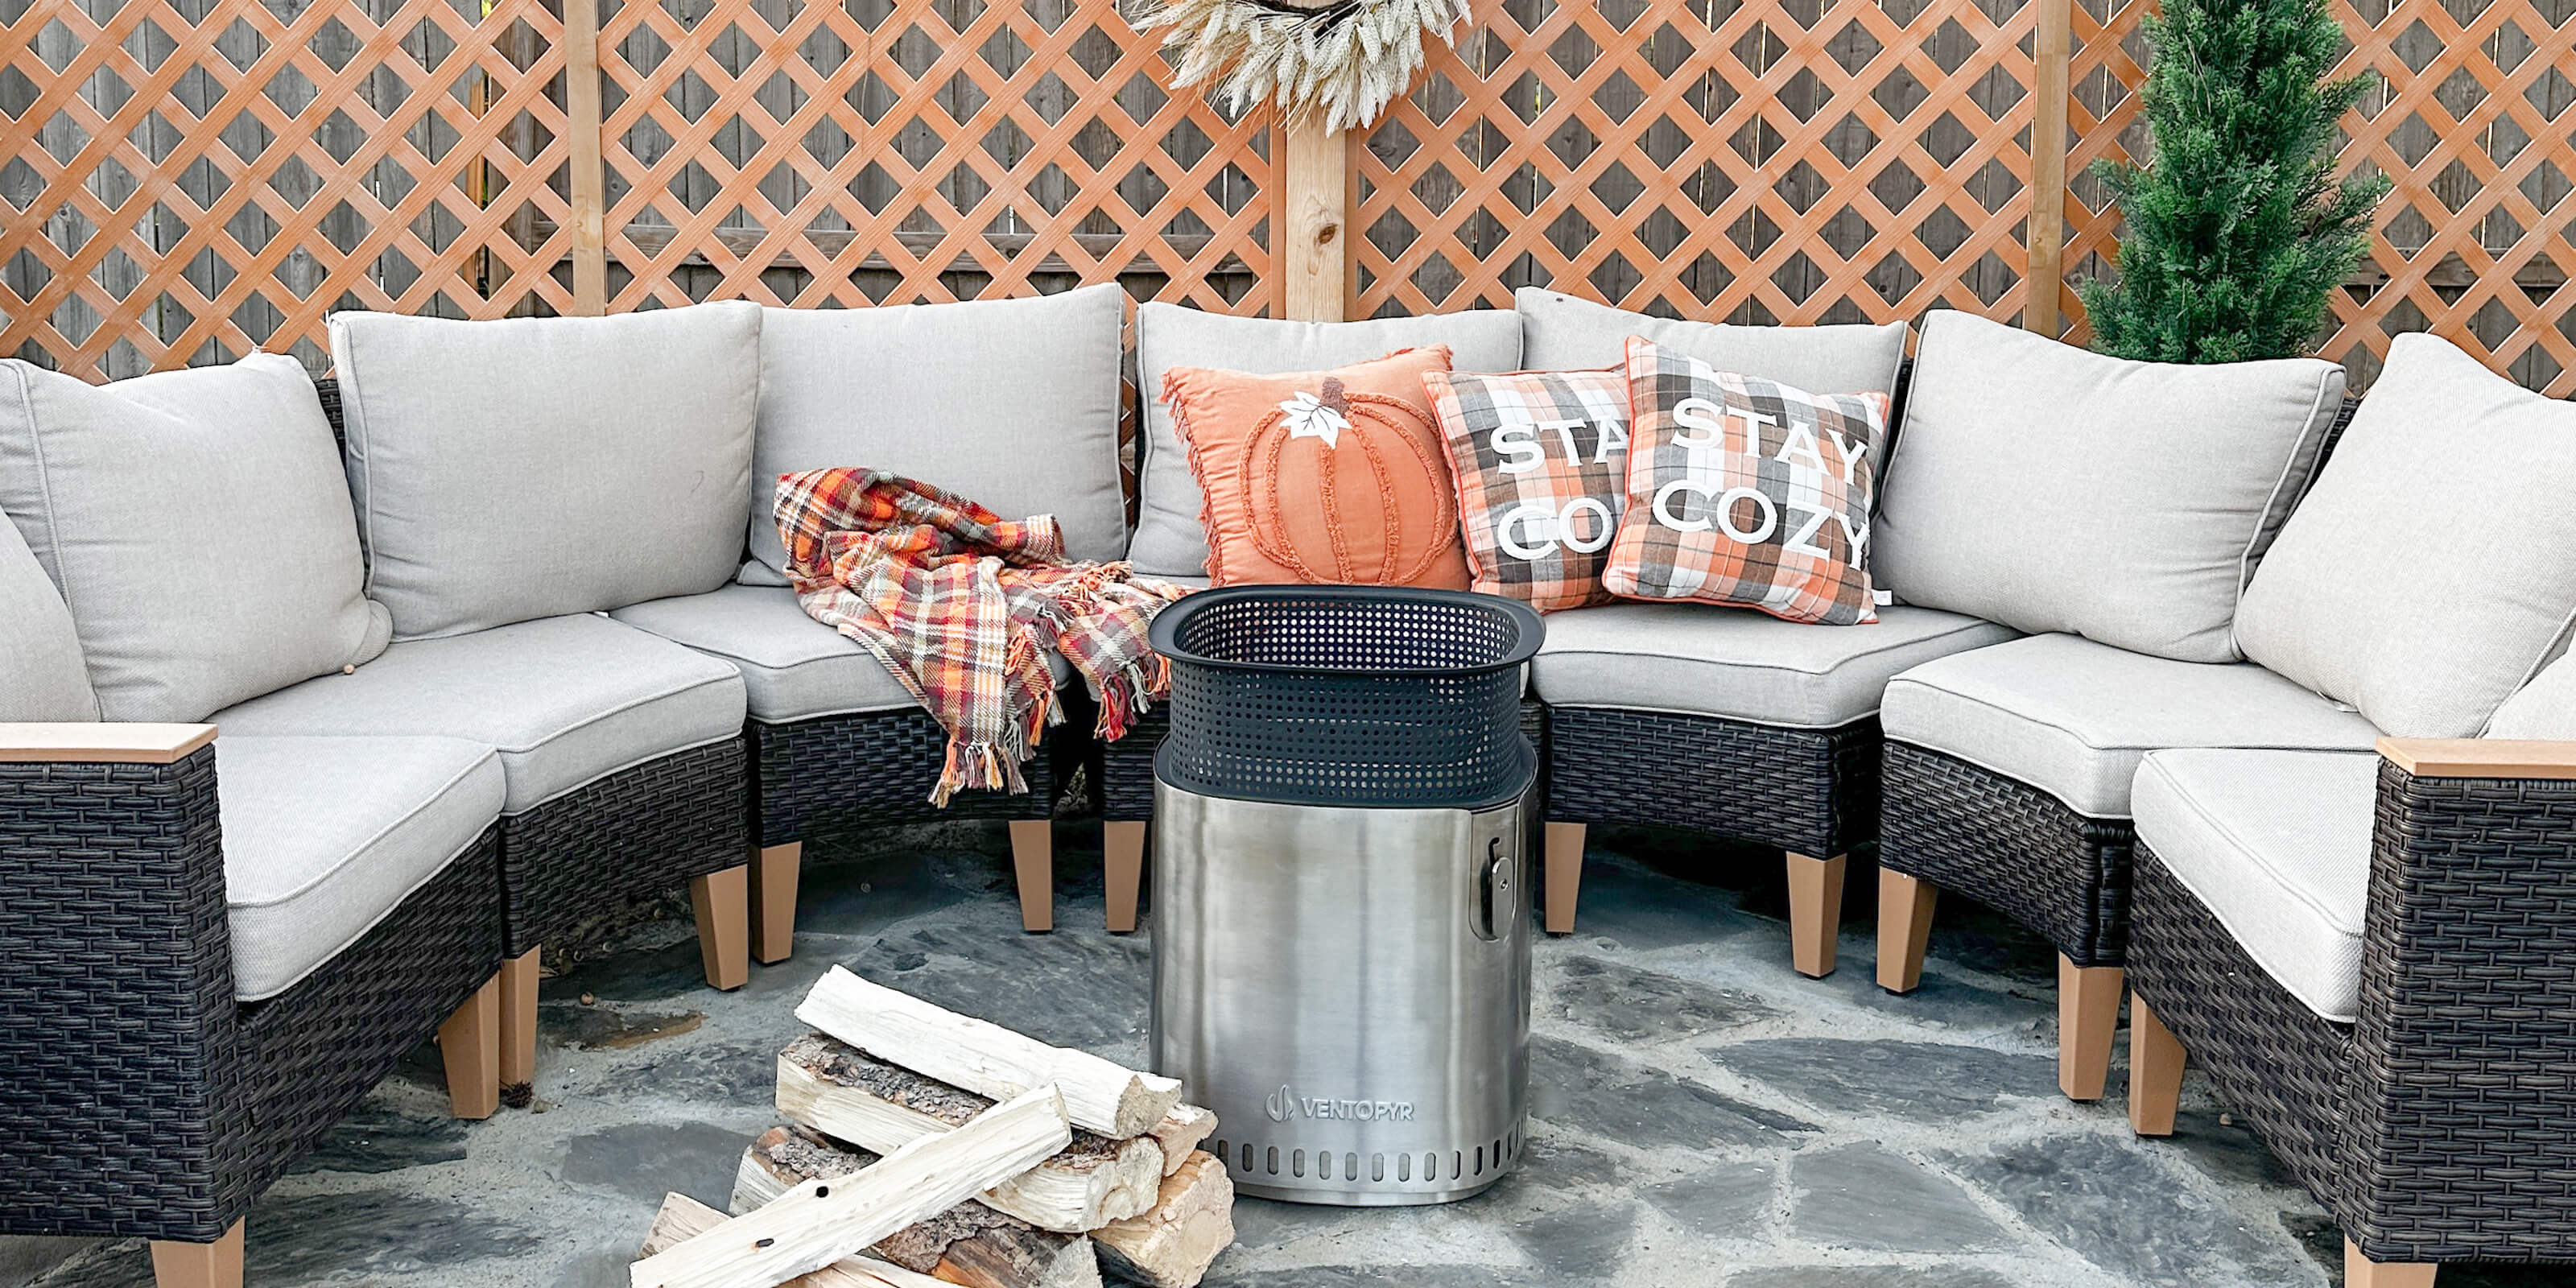 A fire pit is placed in front of an outdoor sofa